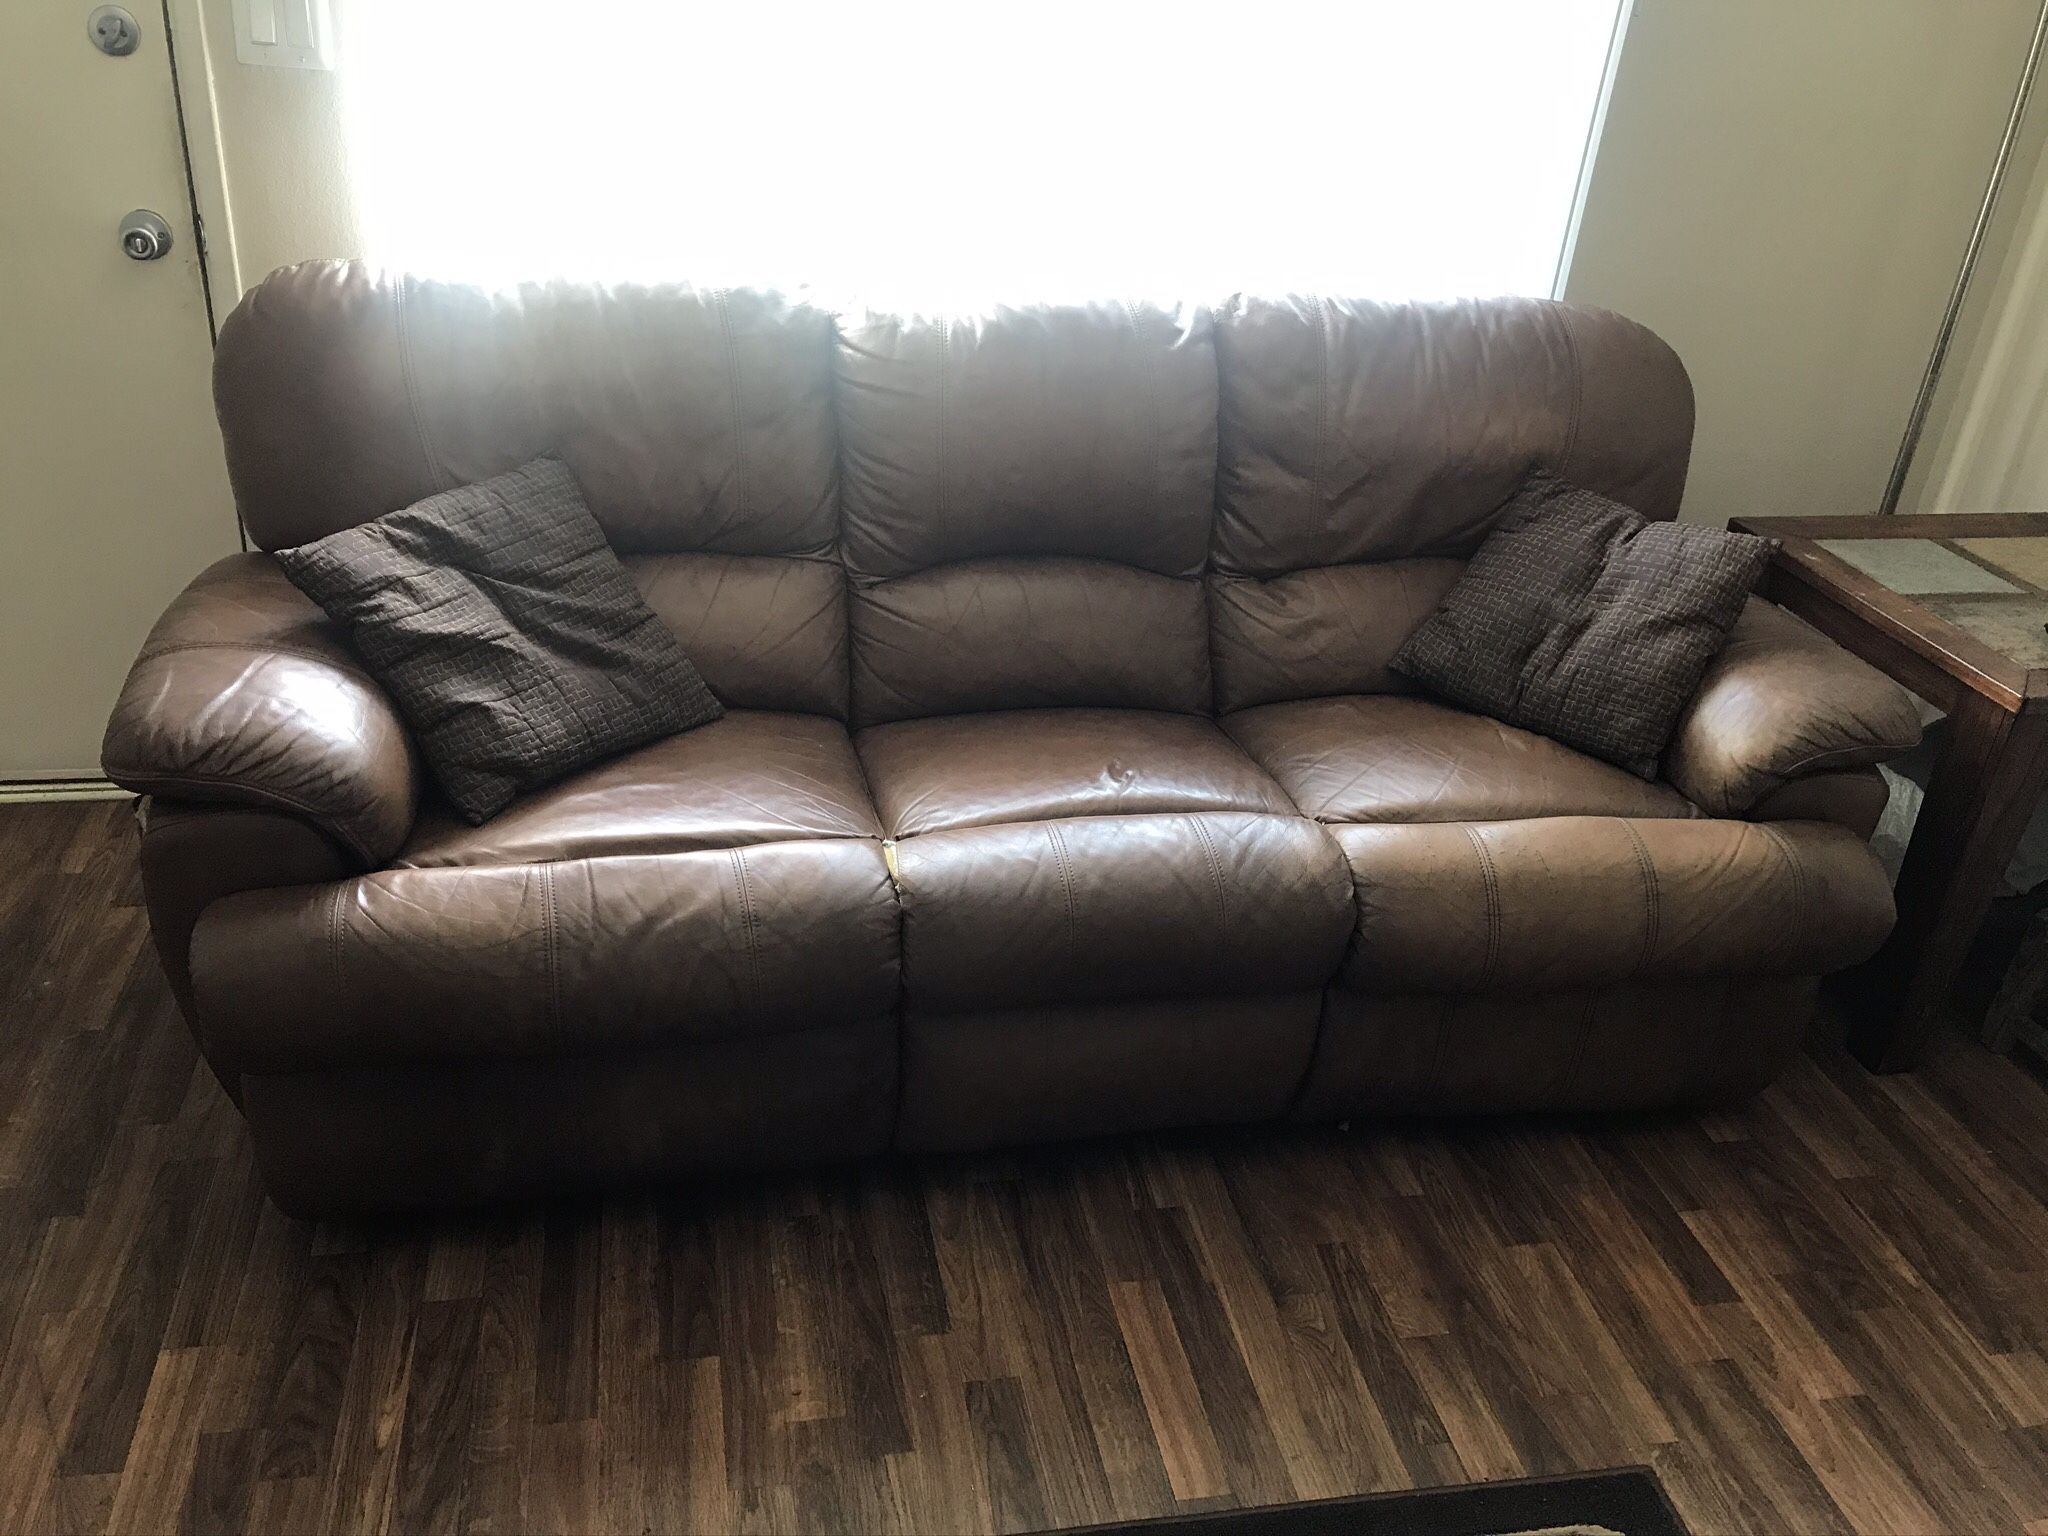 FREE Furniture In Good Condition